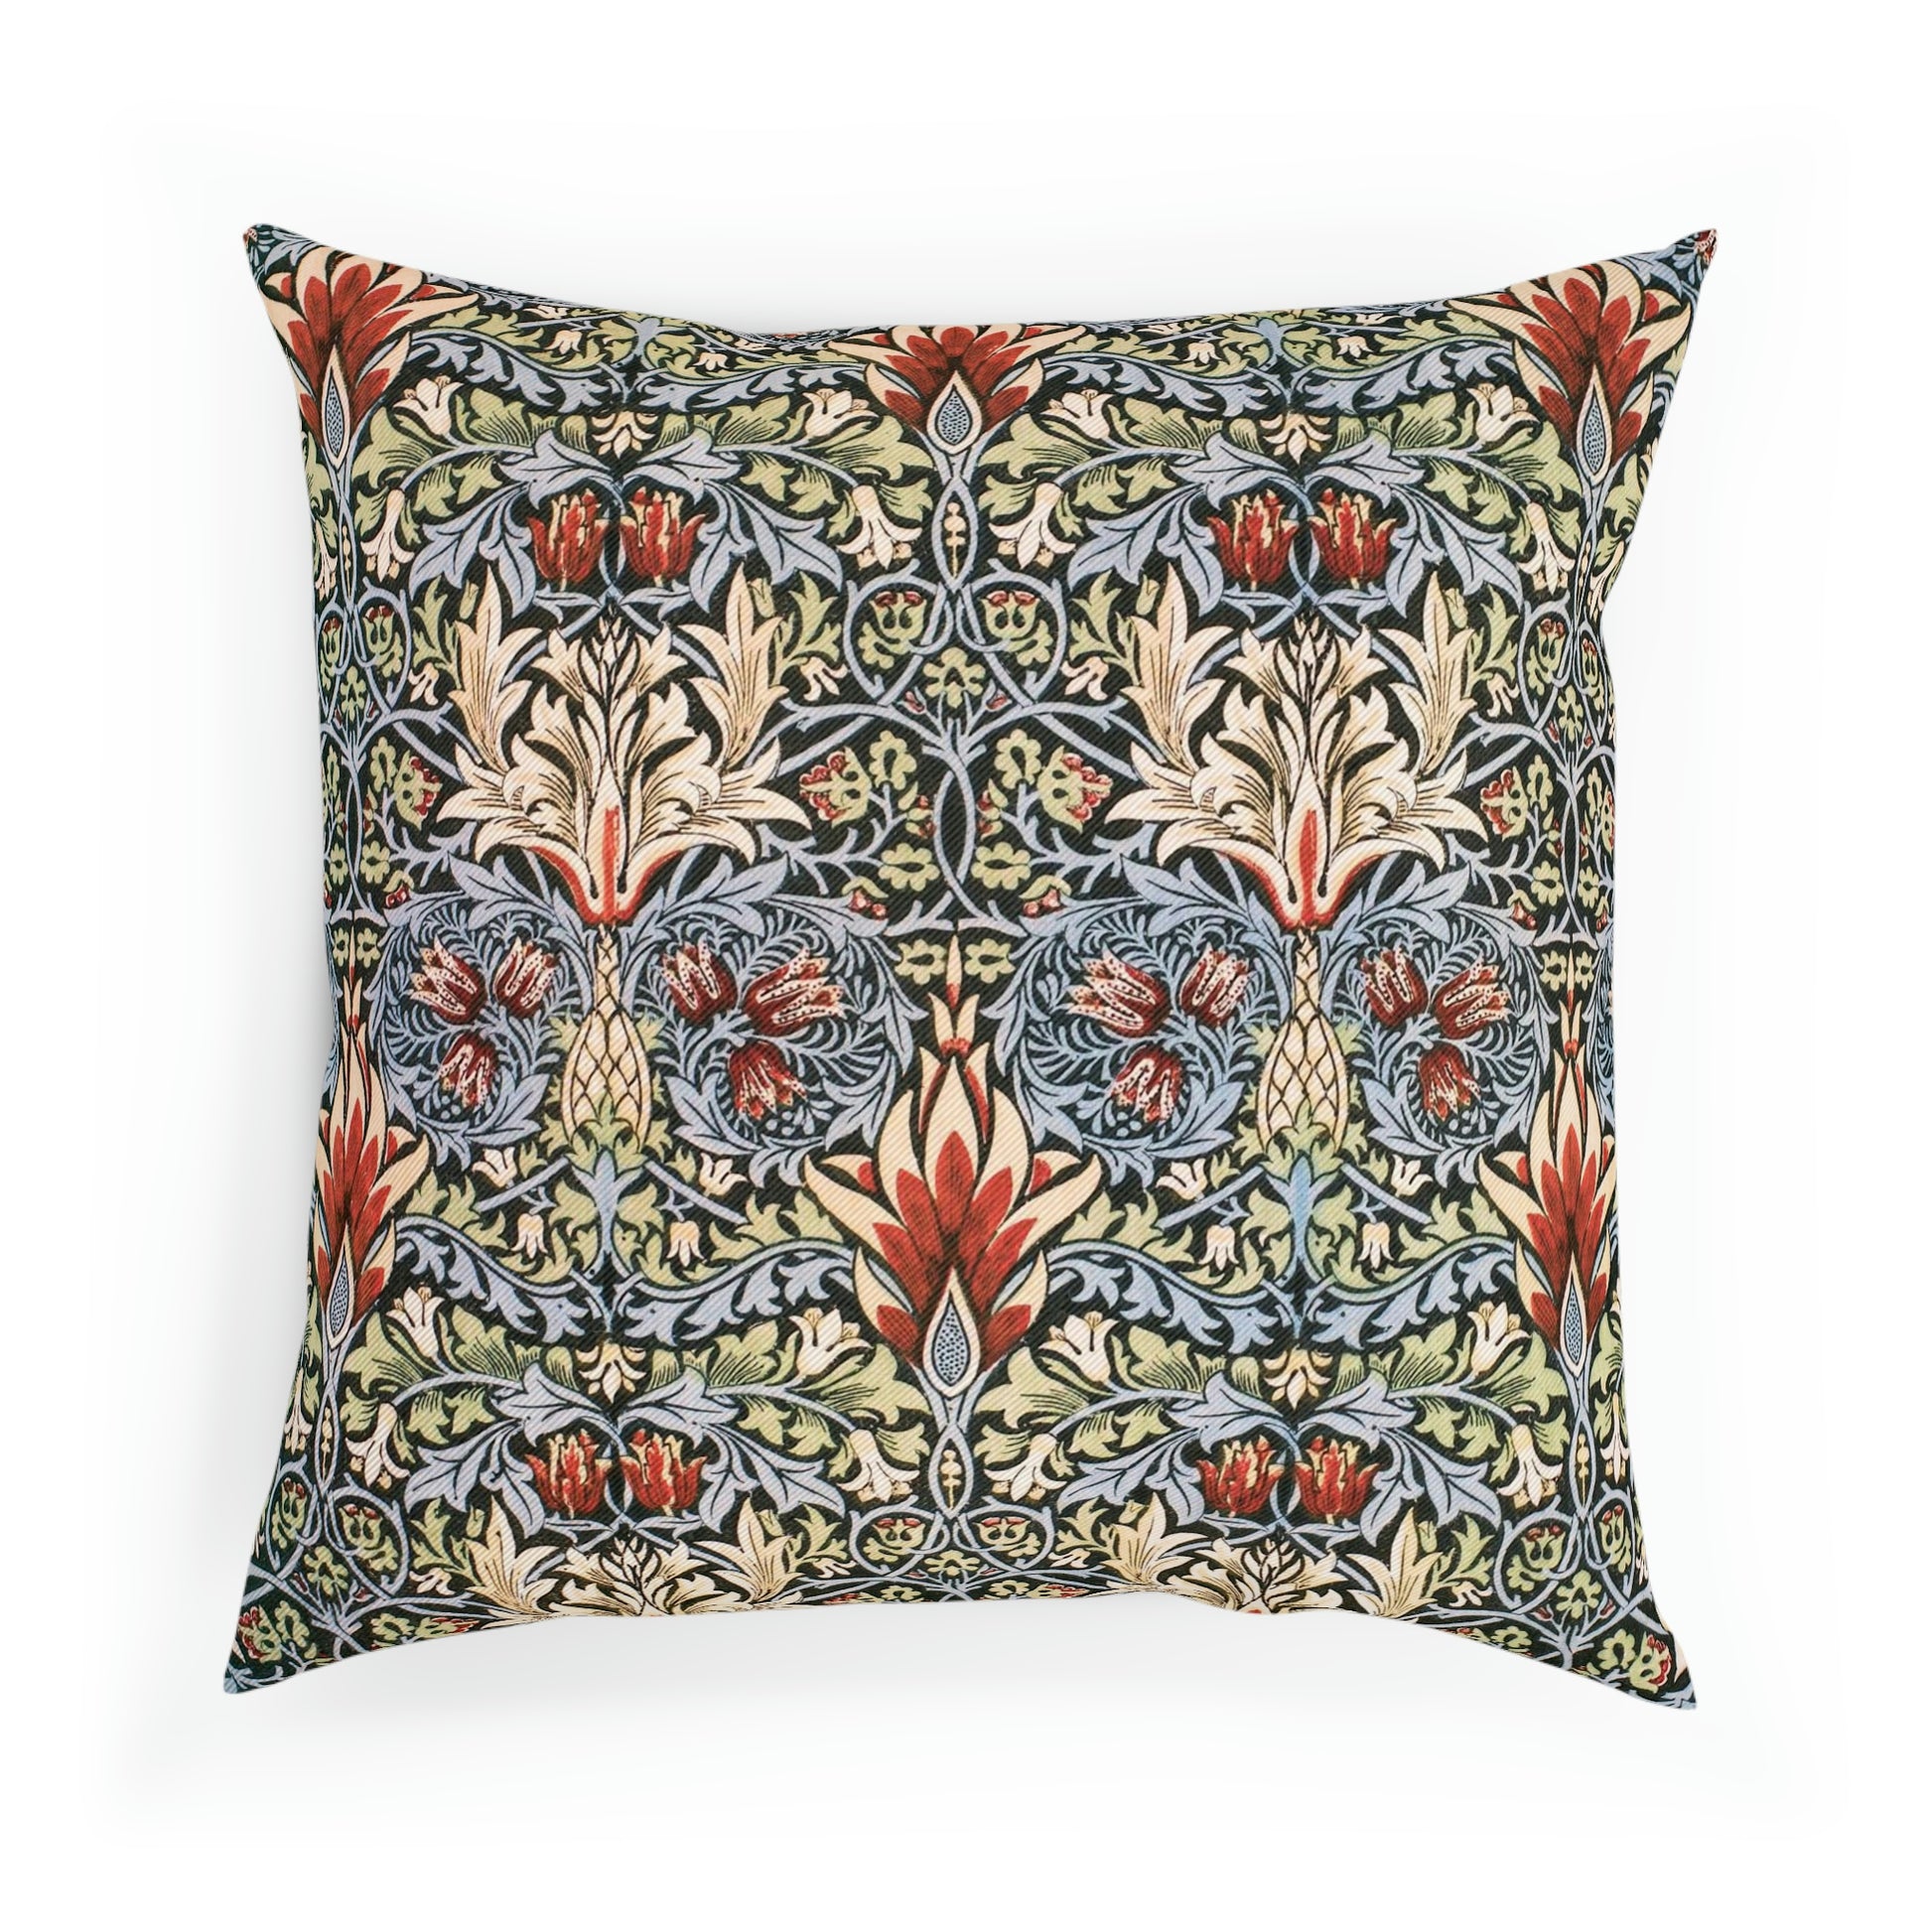 William-Morris-and-Co-Cushion-and-Cushion-Cover-Snakeshead-Collection-2